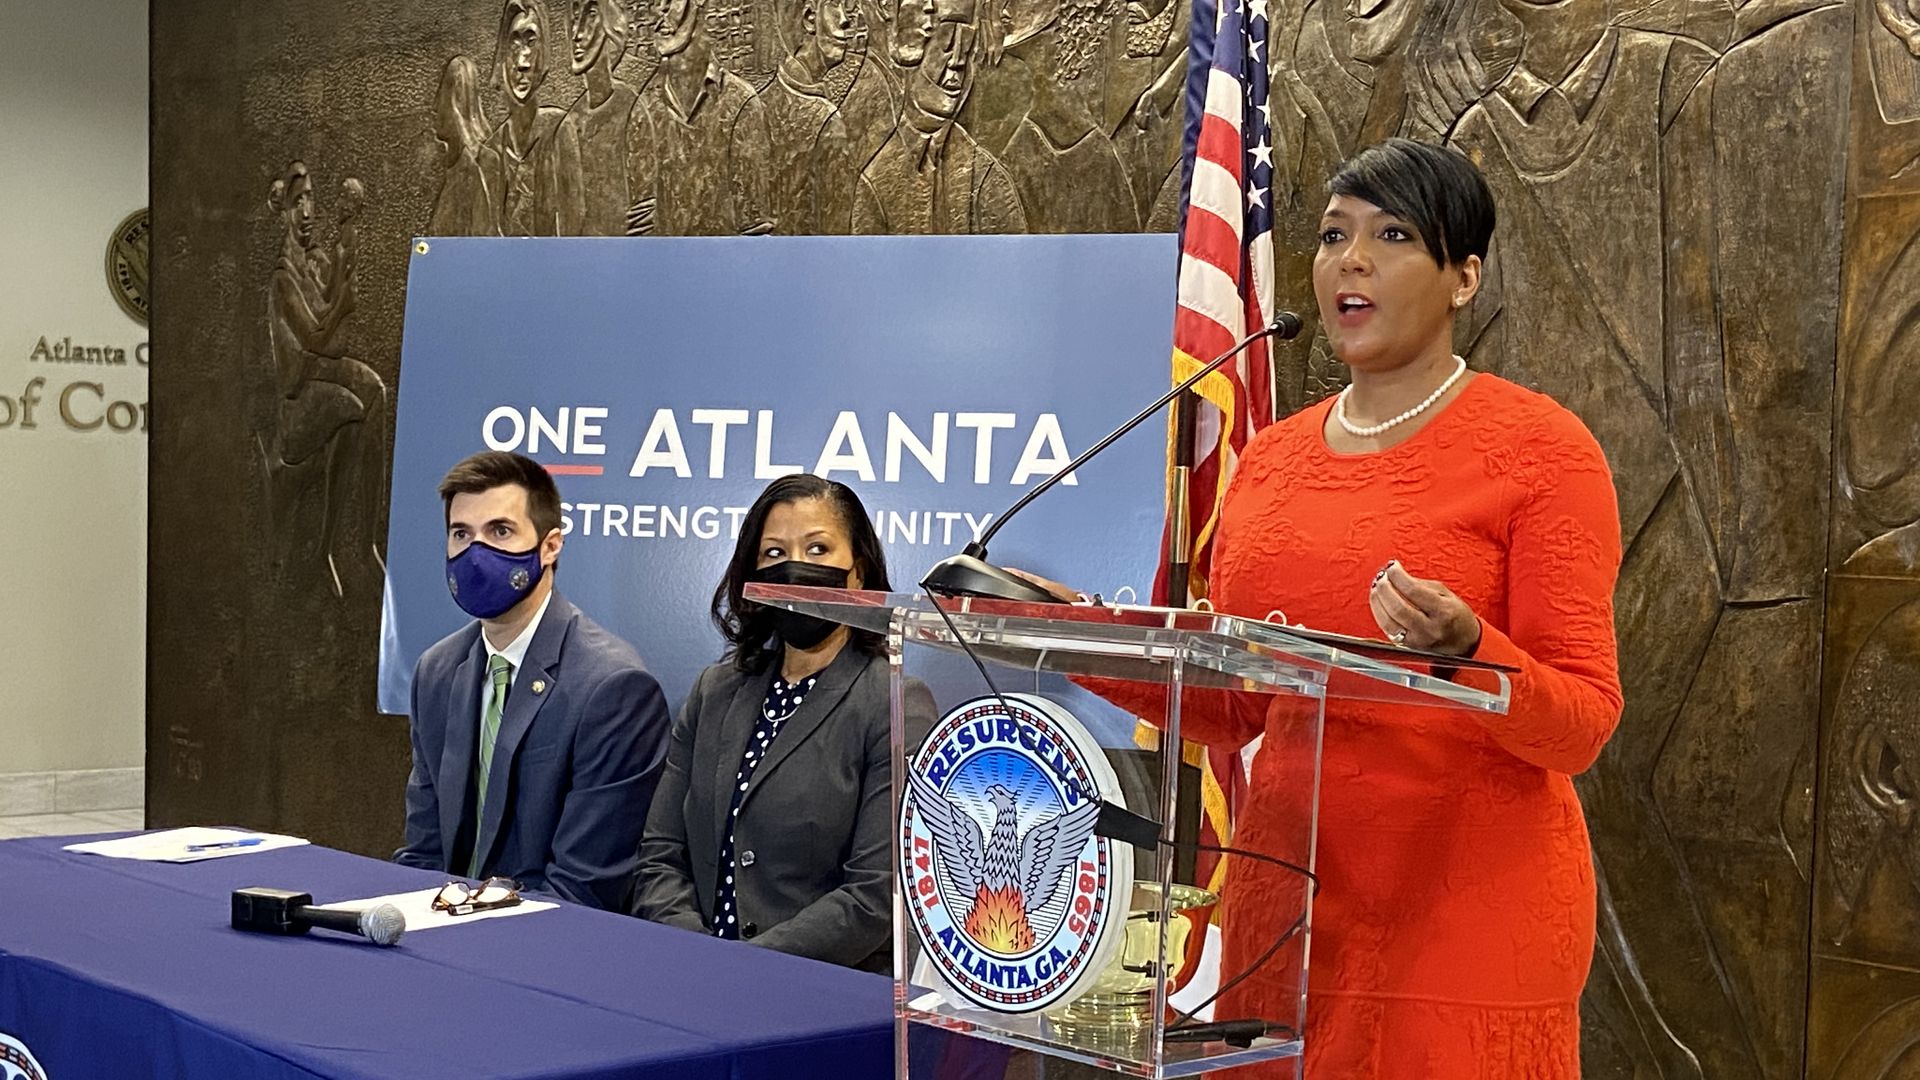 Mayor Keisha Lance Bottoms speaks at a lectern with two staffers seated next to her